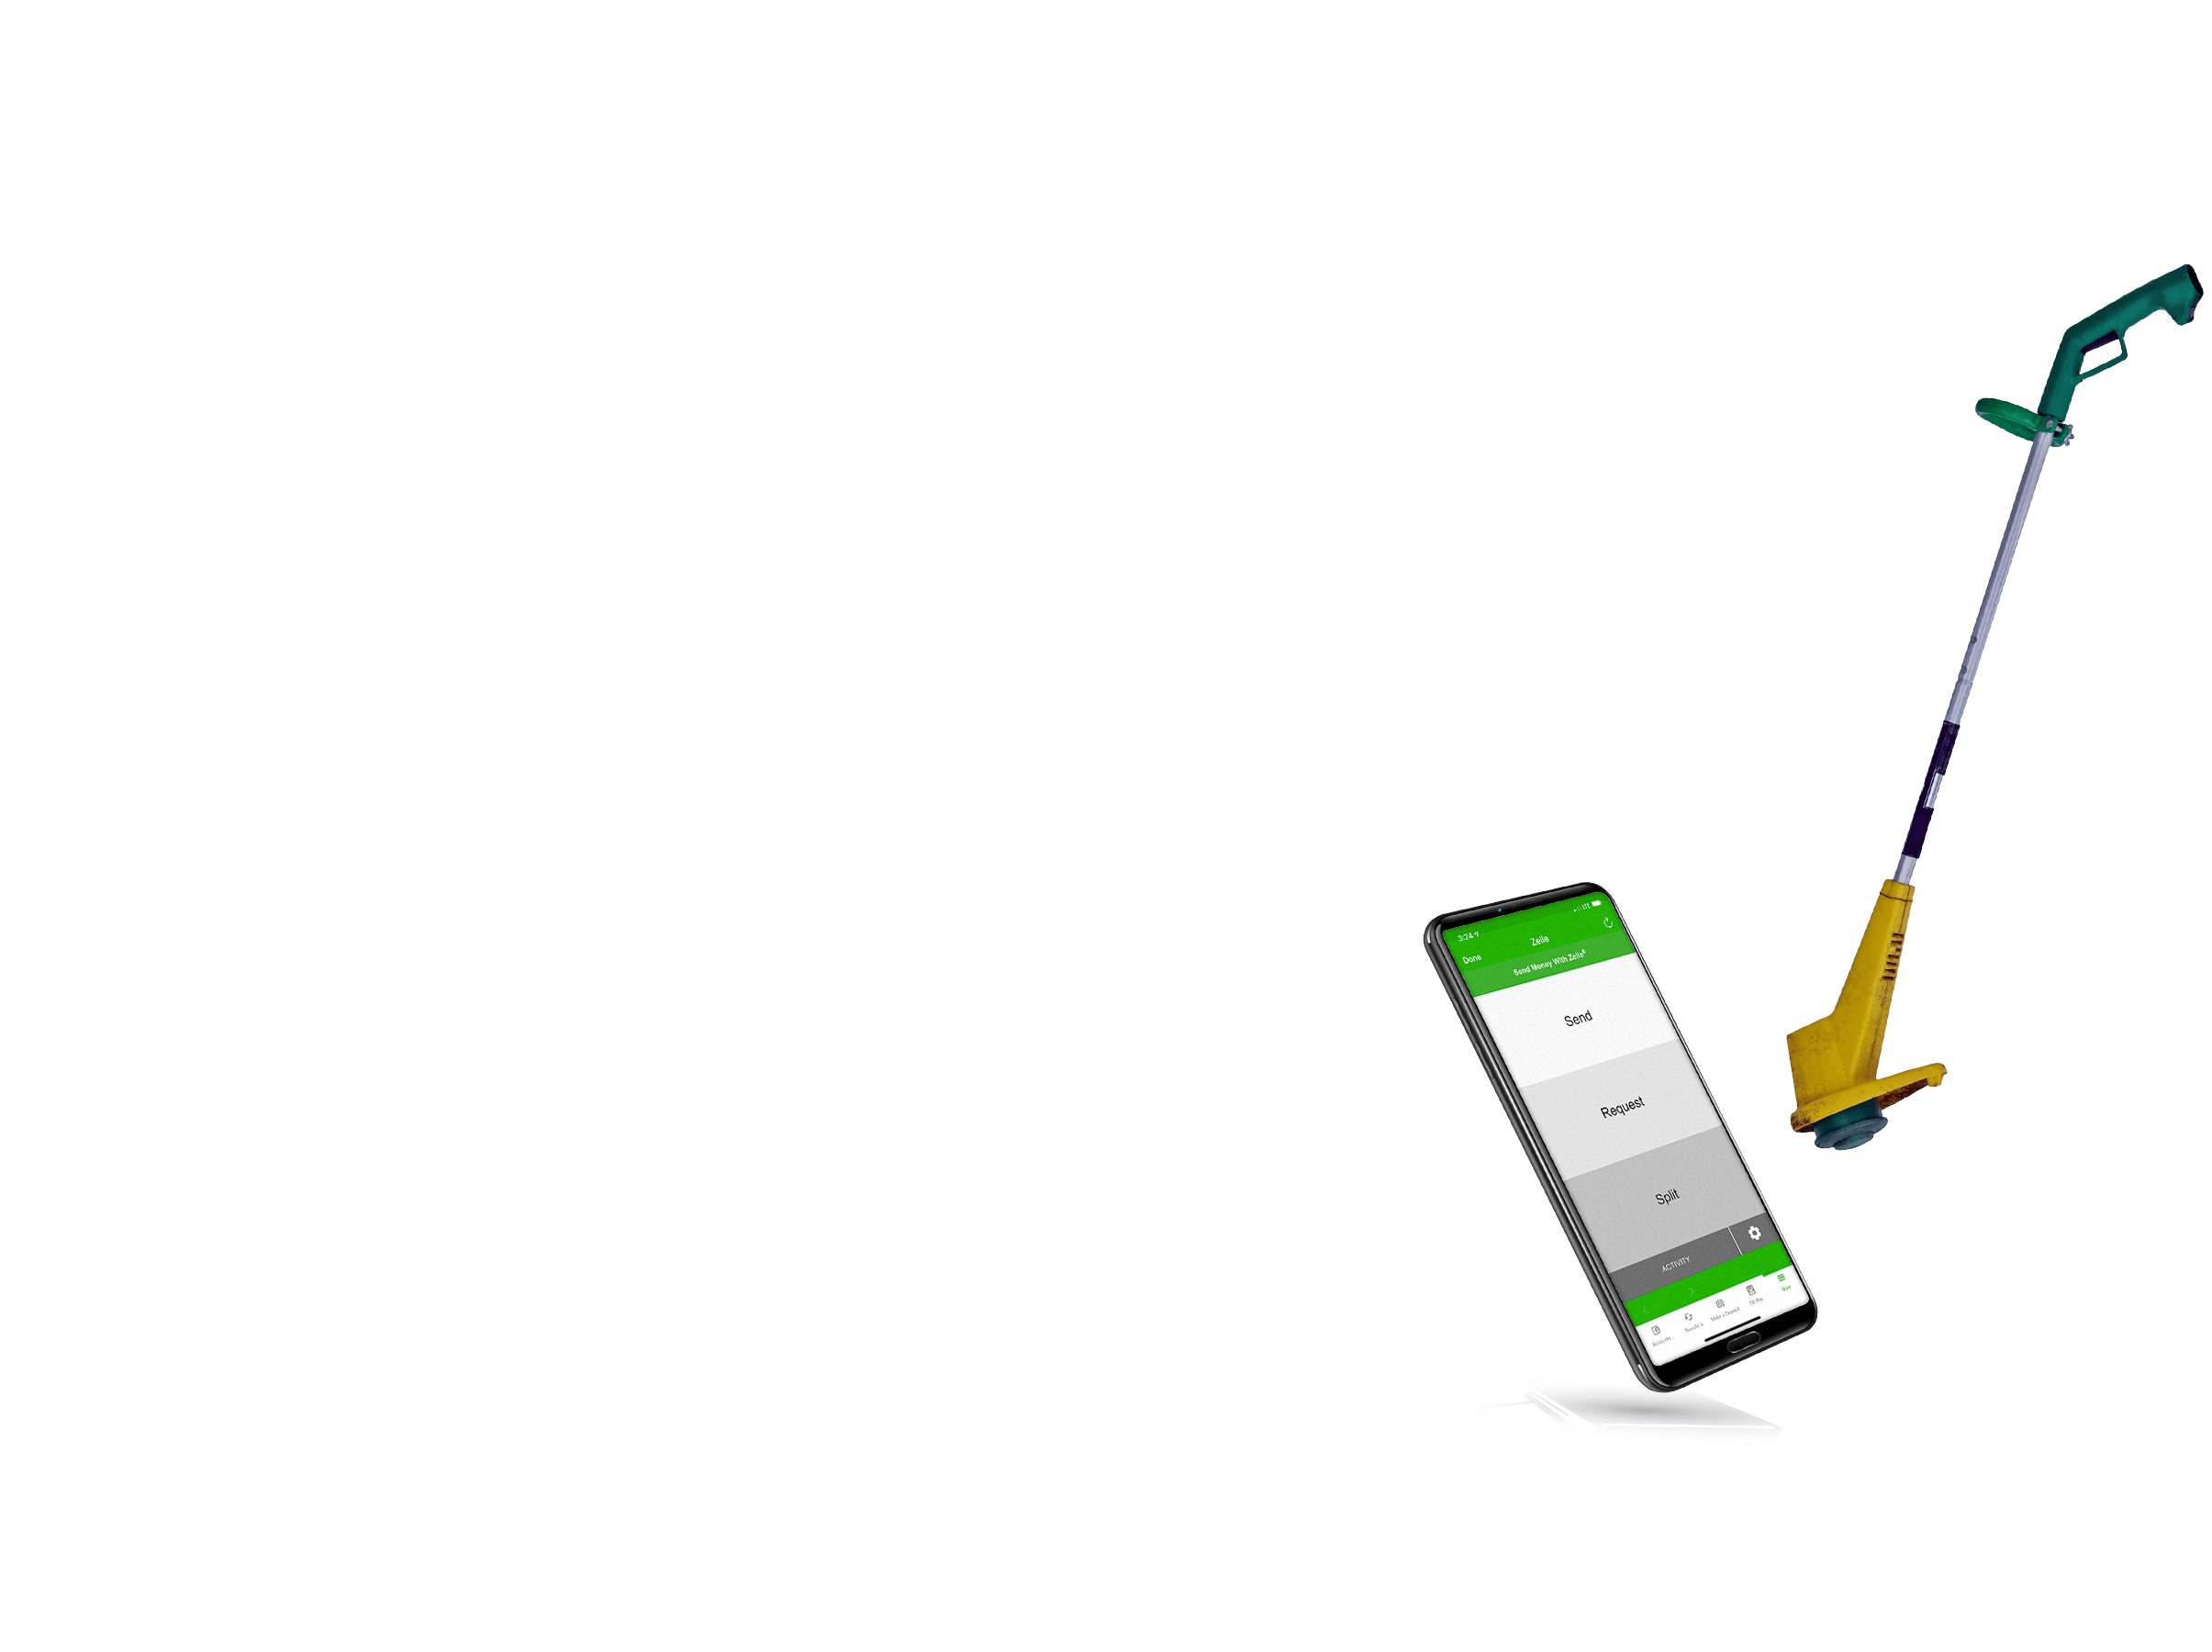 Floating objects, smartphone with Zelle interface and yellow and green weedeater